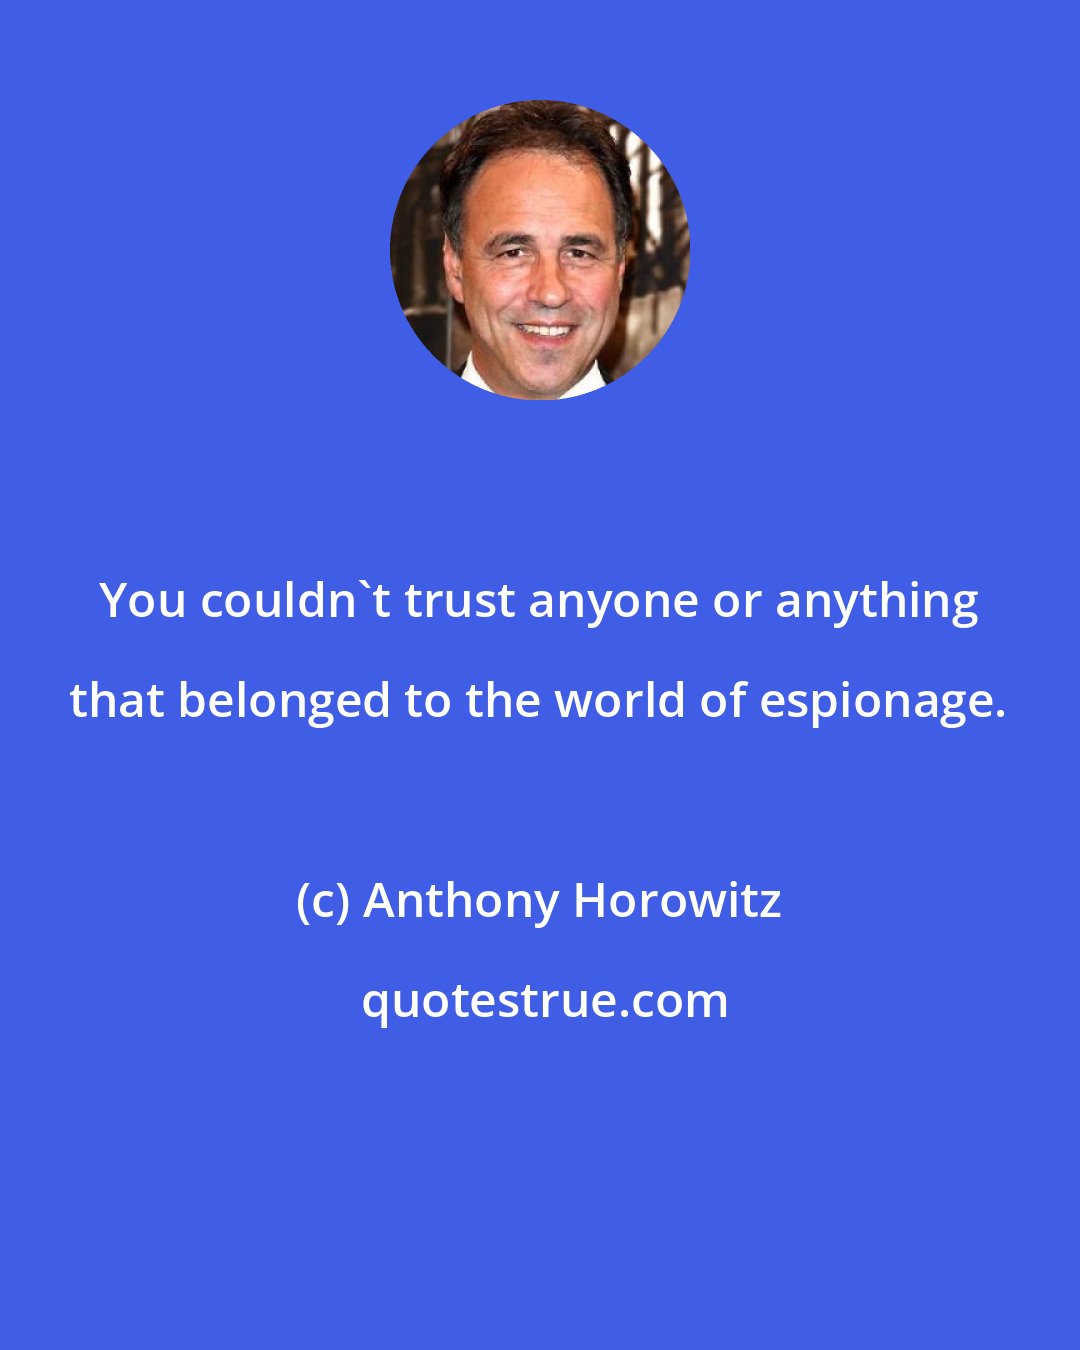 Anthony Horowitz: You couldn't trust anyone or anything that belonged to the world of espionage.